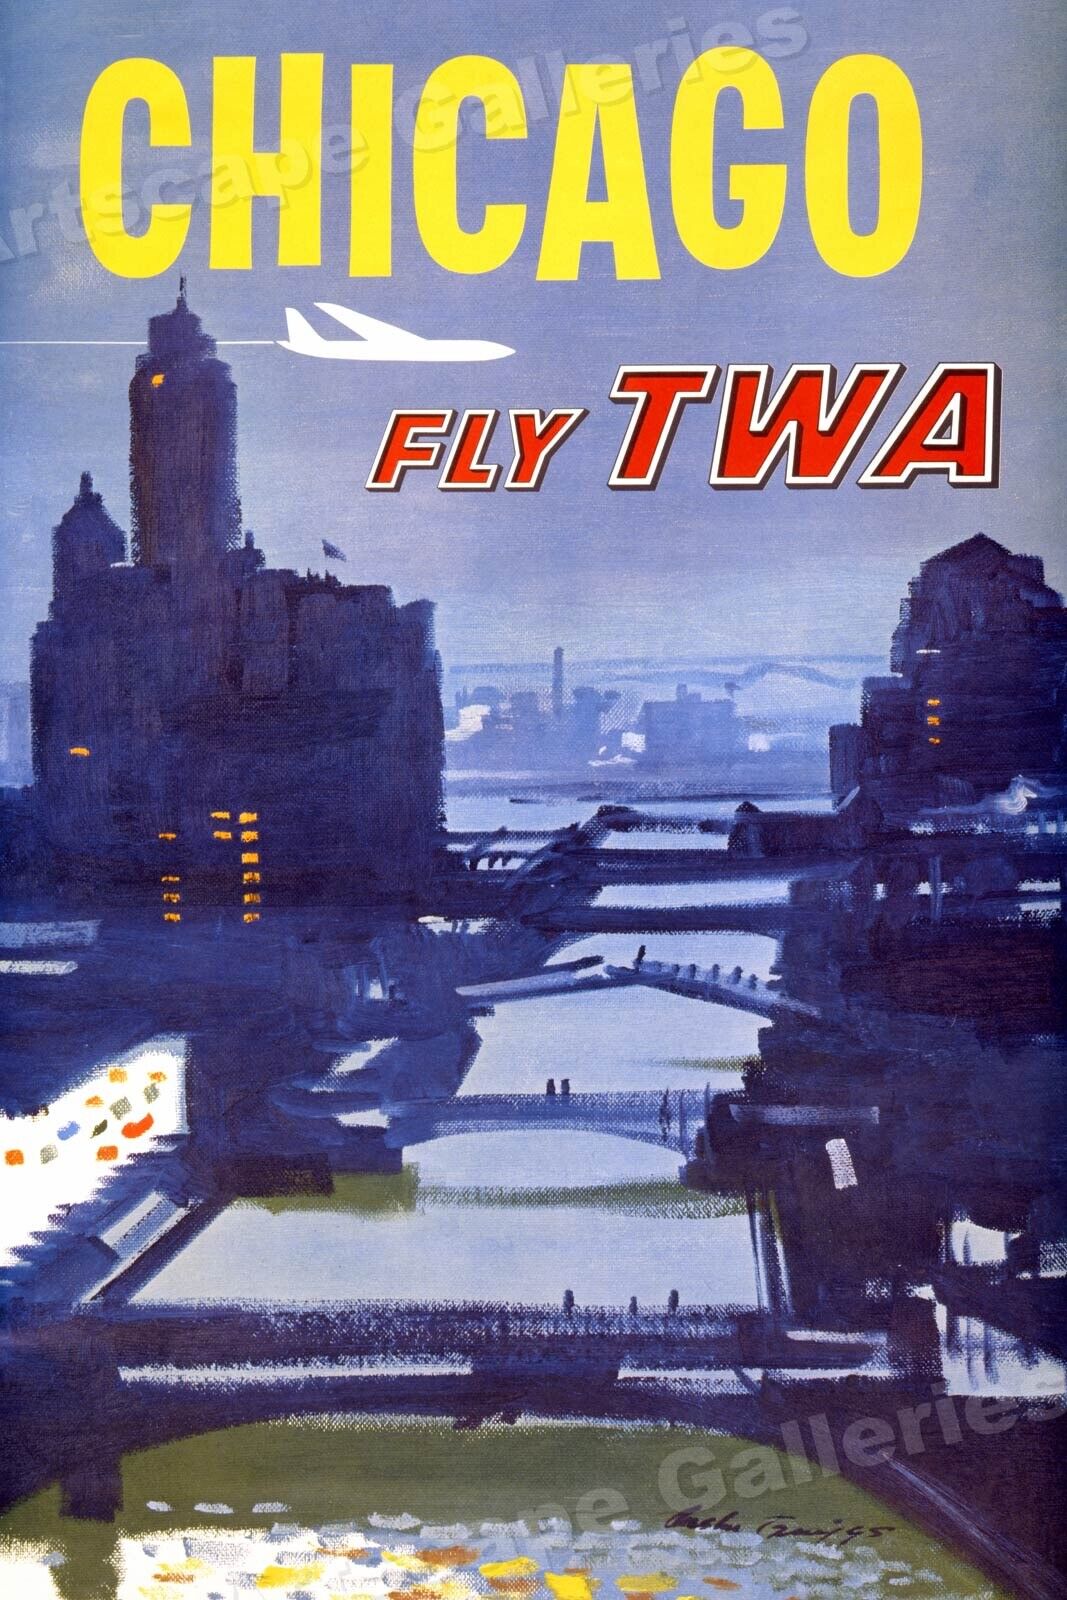 Fly TWA to Chicago Classic Airline Vintage Style Travel Poster - 24x36